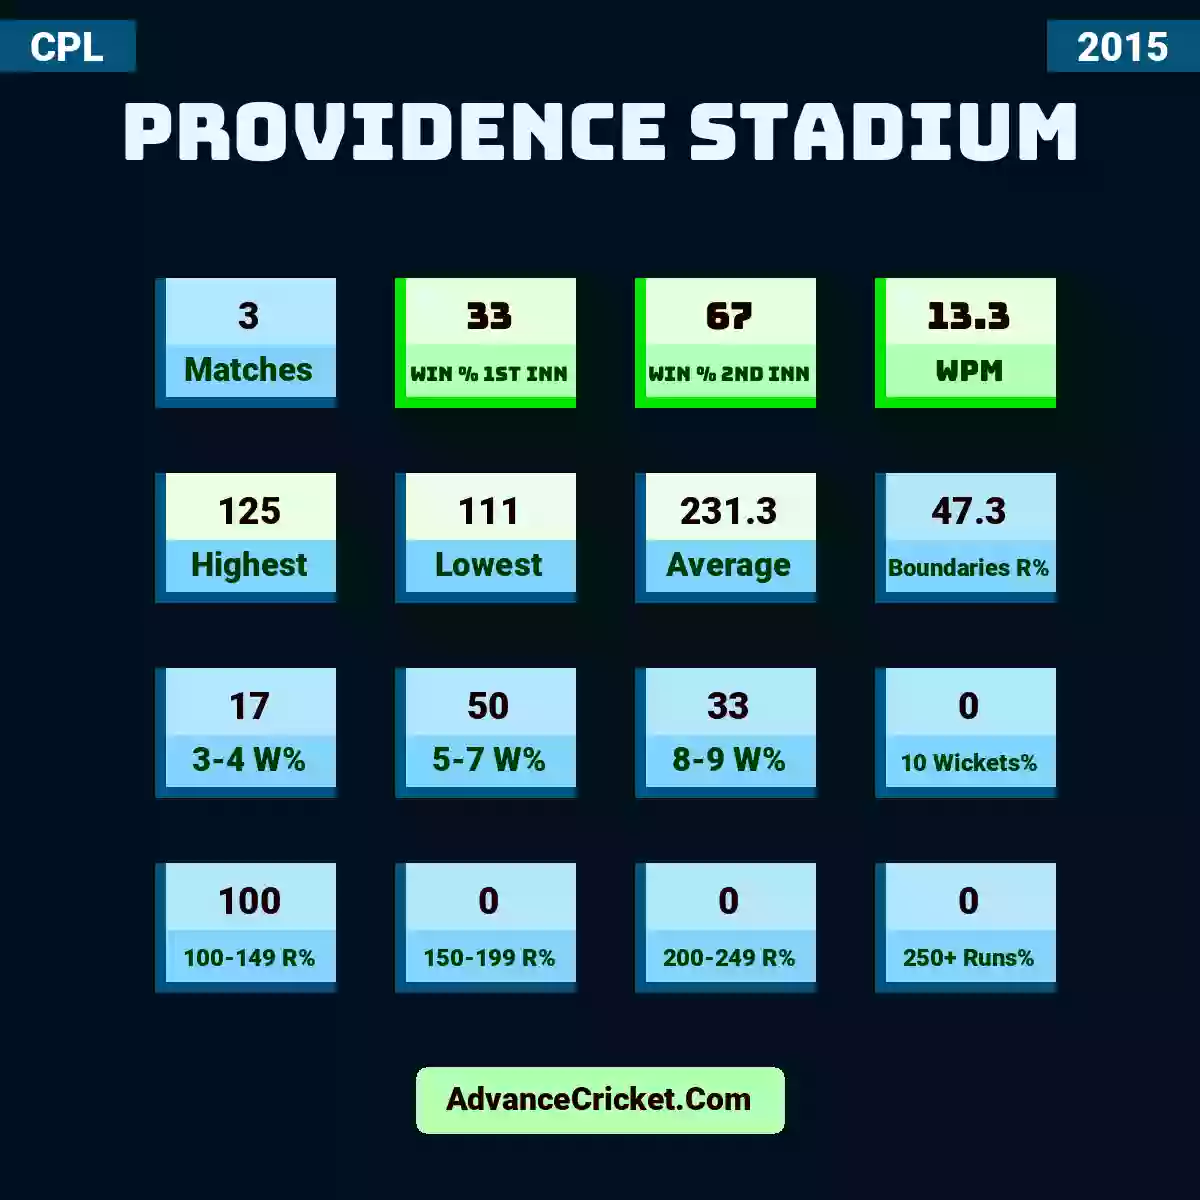 Image showing Providence Stadium with Matches: 3, Win % 1st Inn: 33, Win % 2nd Inn: 67, WPM: 13.3, Highest: 125, Lowest: 111, Average: 231.3, Boundaries R%: 47.3, 3-4 W%: 17, 5-7 W%: 50, 8-9 W%: 33, 10 Wickets%: 0, 100-149 R%: 100, 150-199 R%: 0, 200-249 R%: 0, 250+ Runs%: 0.